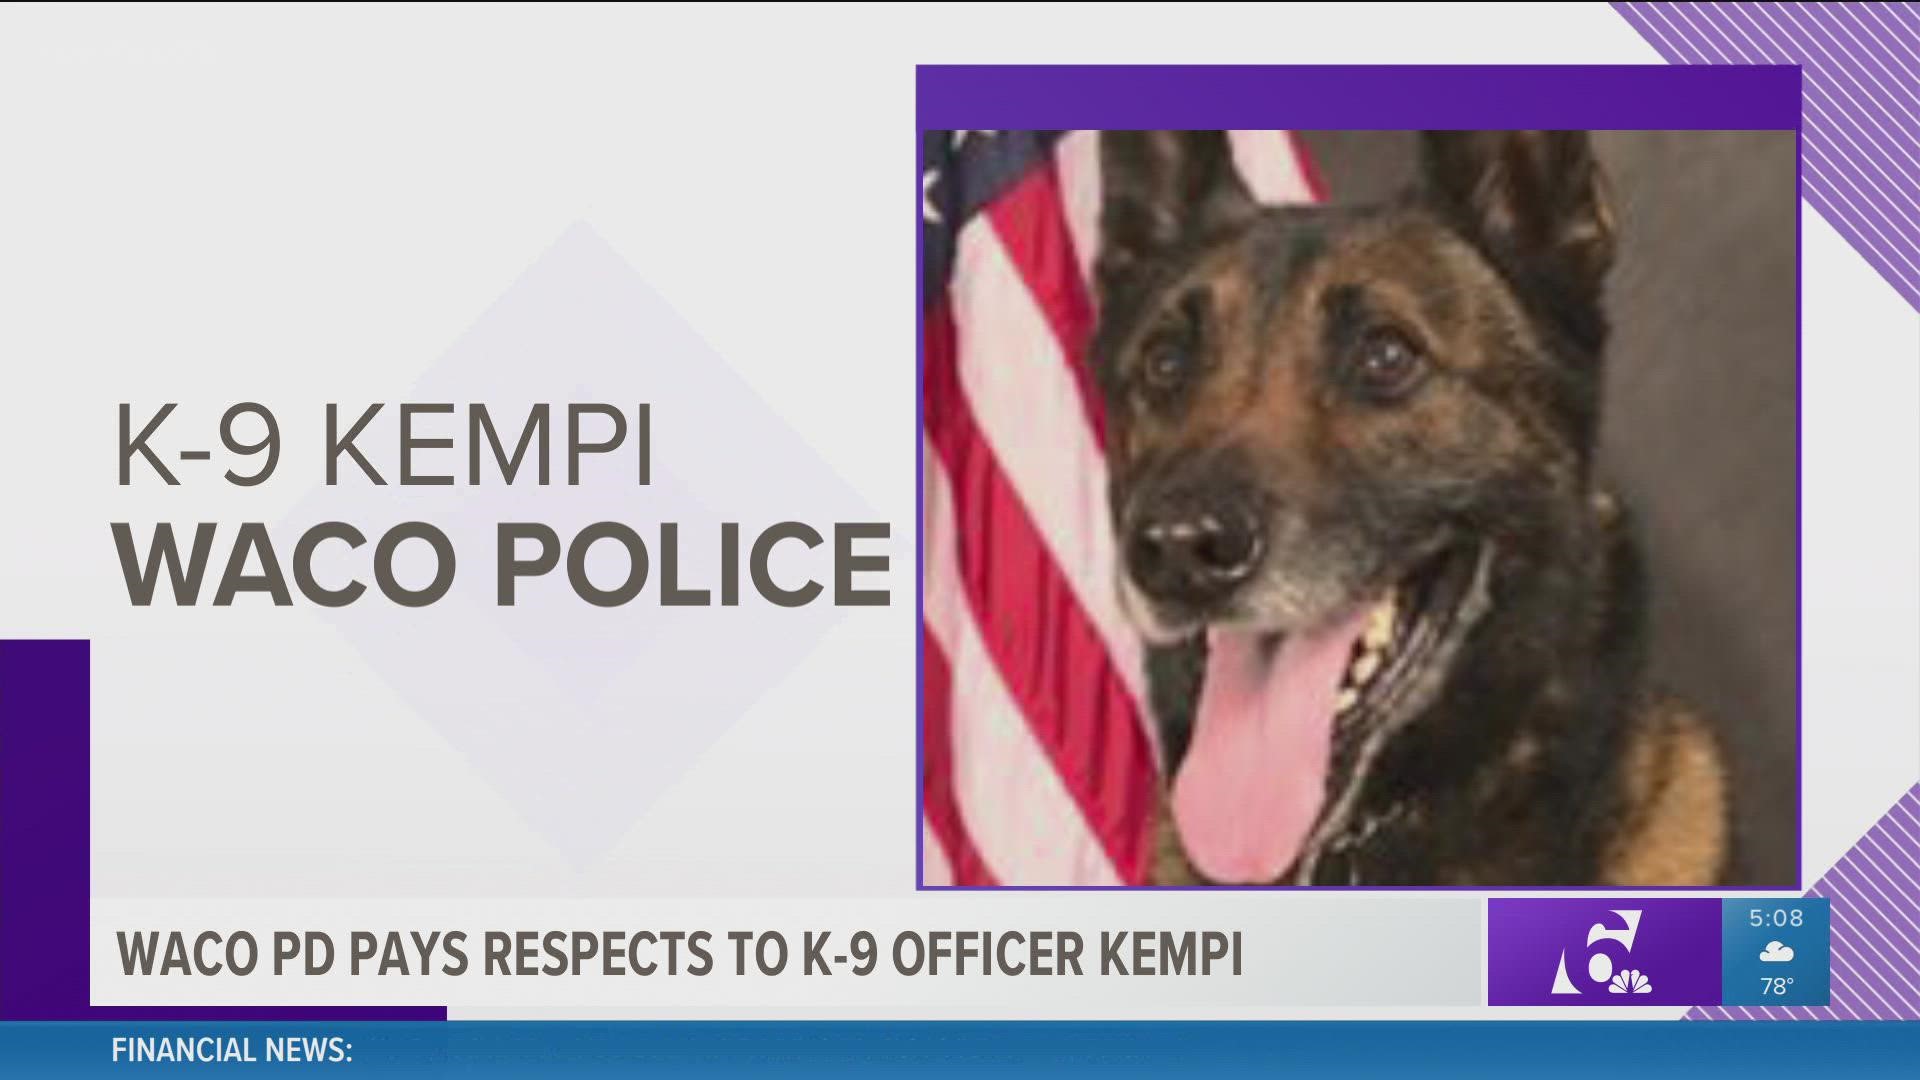 Kempi was diagnosed with a brain tumor and died in November of medical complications. In his career, he helped with 1,400 calls and finding $36,000 in drugs.